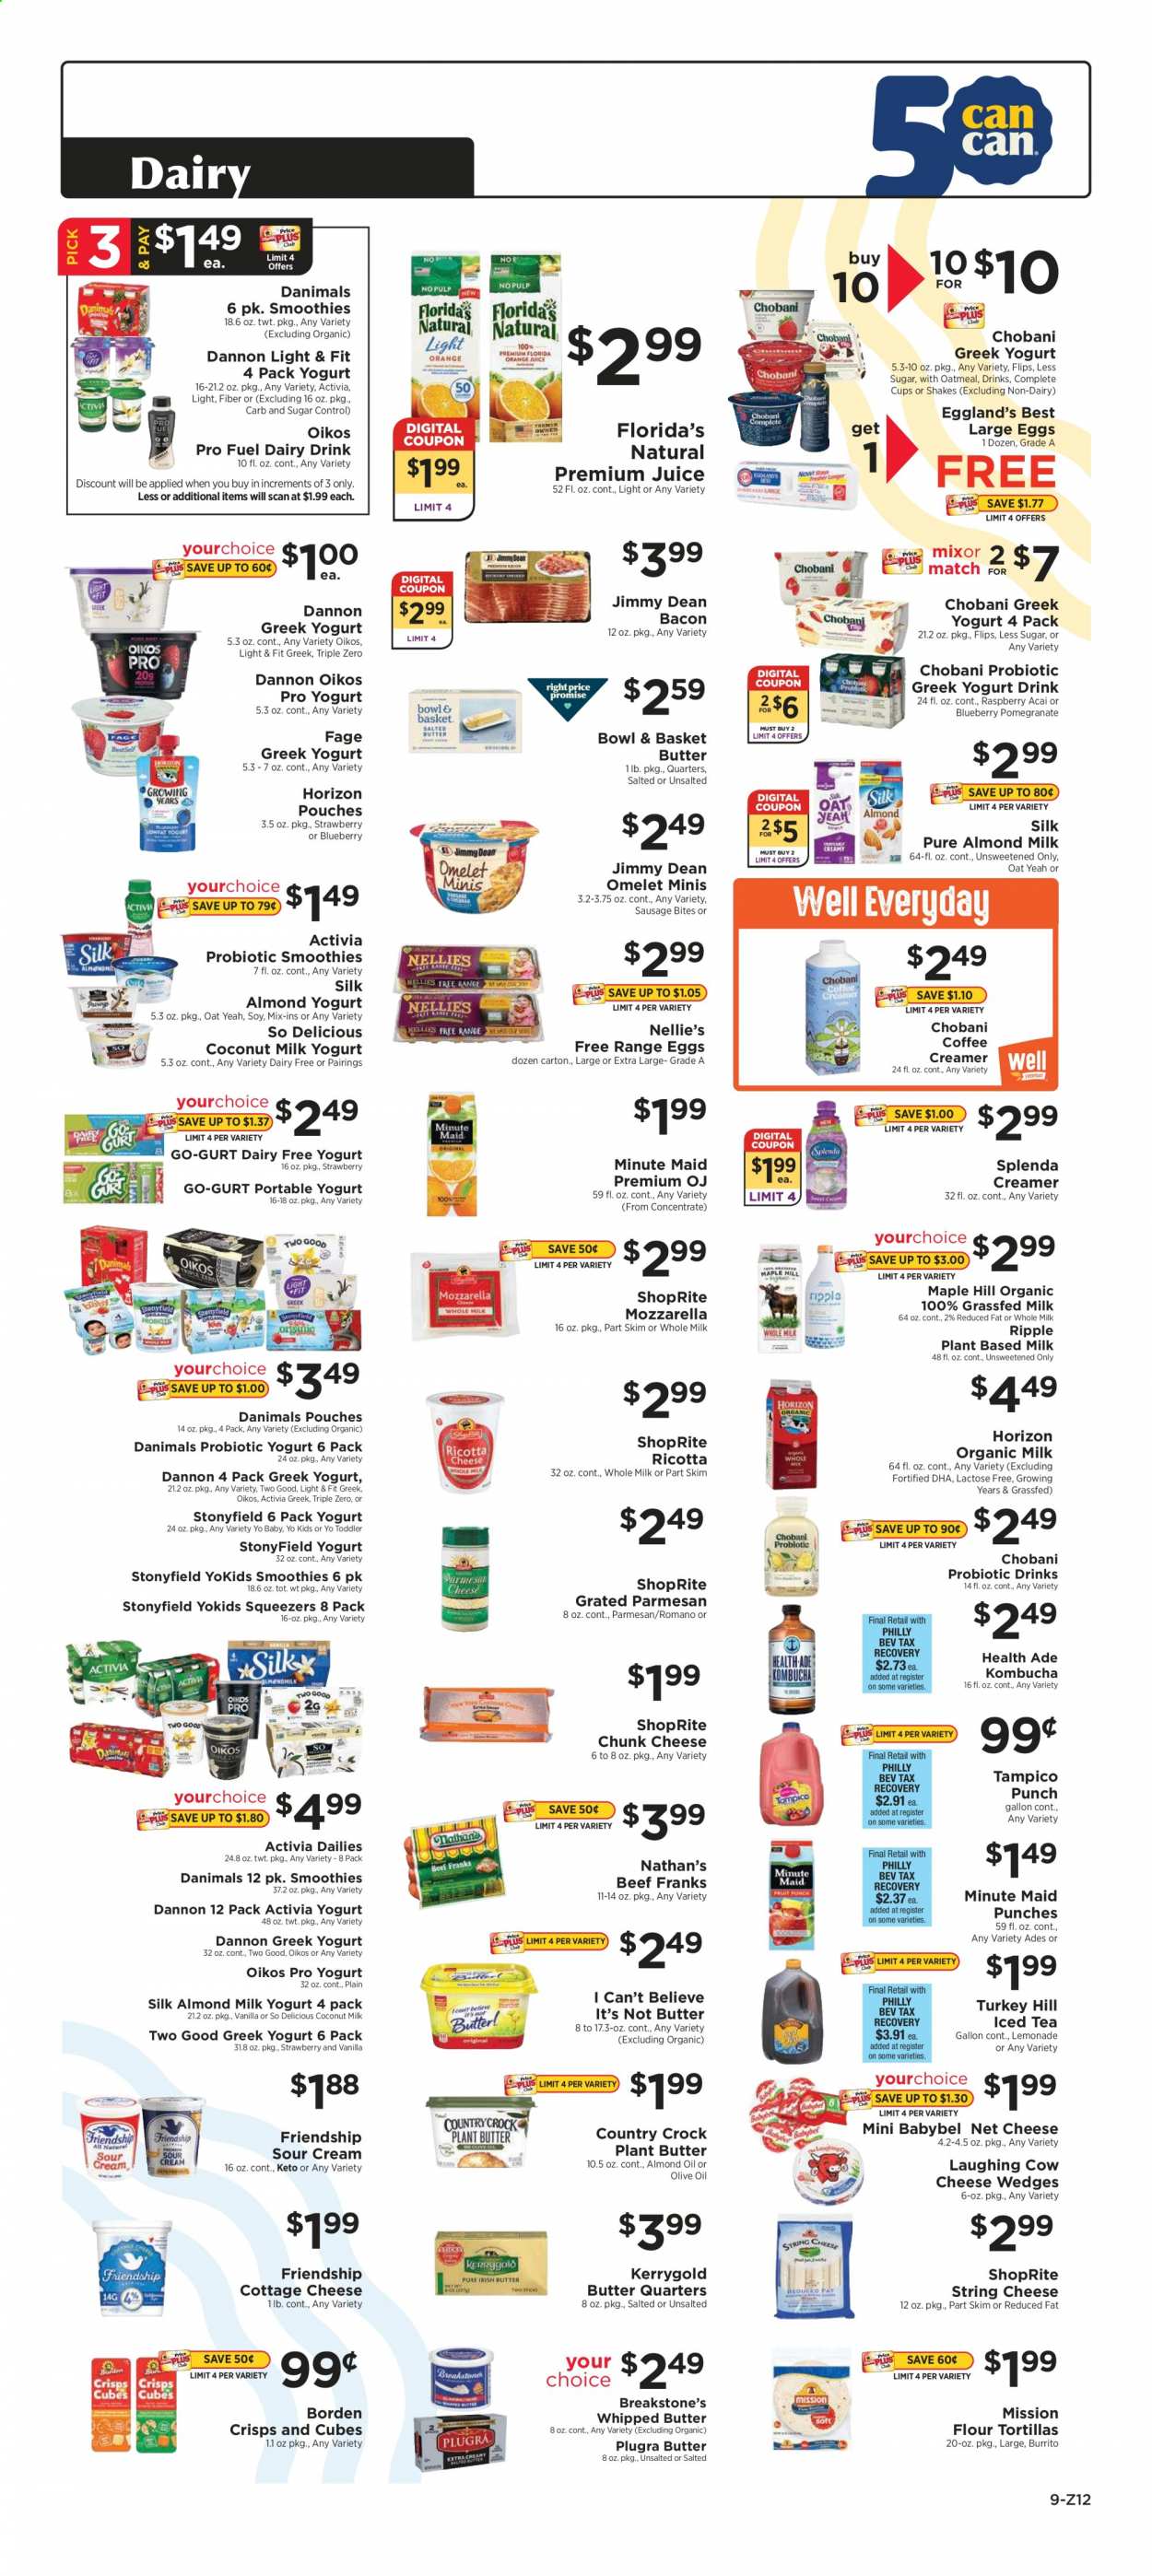 thumbnail - ShopRite Flyer - 01/03/2021 - 01/09/2021 - Sales products - tortillas, burrito, Bowl & Basket, Jimmy Dean, bacon, sausage, cottage cheese, mozzarella, ricotta, string cheese, parmesan, cheese, The Laughing Cow, Babybel, chunk cheese, greek yoghurt, yoghurt, probiotic yoghurt, Activia, Oikos, Chobani, Dannon, Danimals, almond milk, organic milk, yoghurt drink, shake, large eggs, whipped butter, I Can't Believe It's Not Butter, sour cream, creamer, Florida's Natural, oatmeal, oats, coconut milk, almond oil, olive oil, lemonade, juice, smoothie, kombucha, punch, bowl. Page 9.